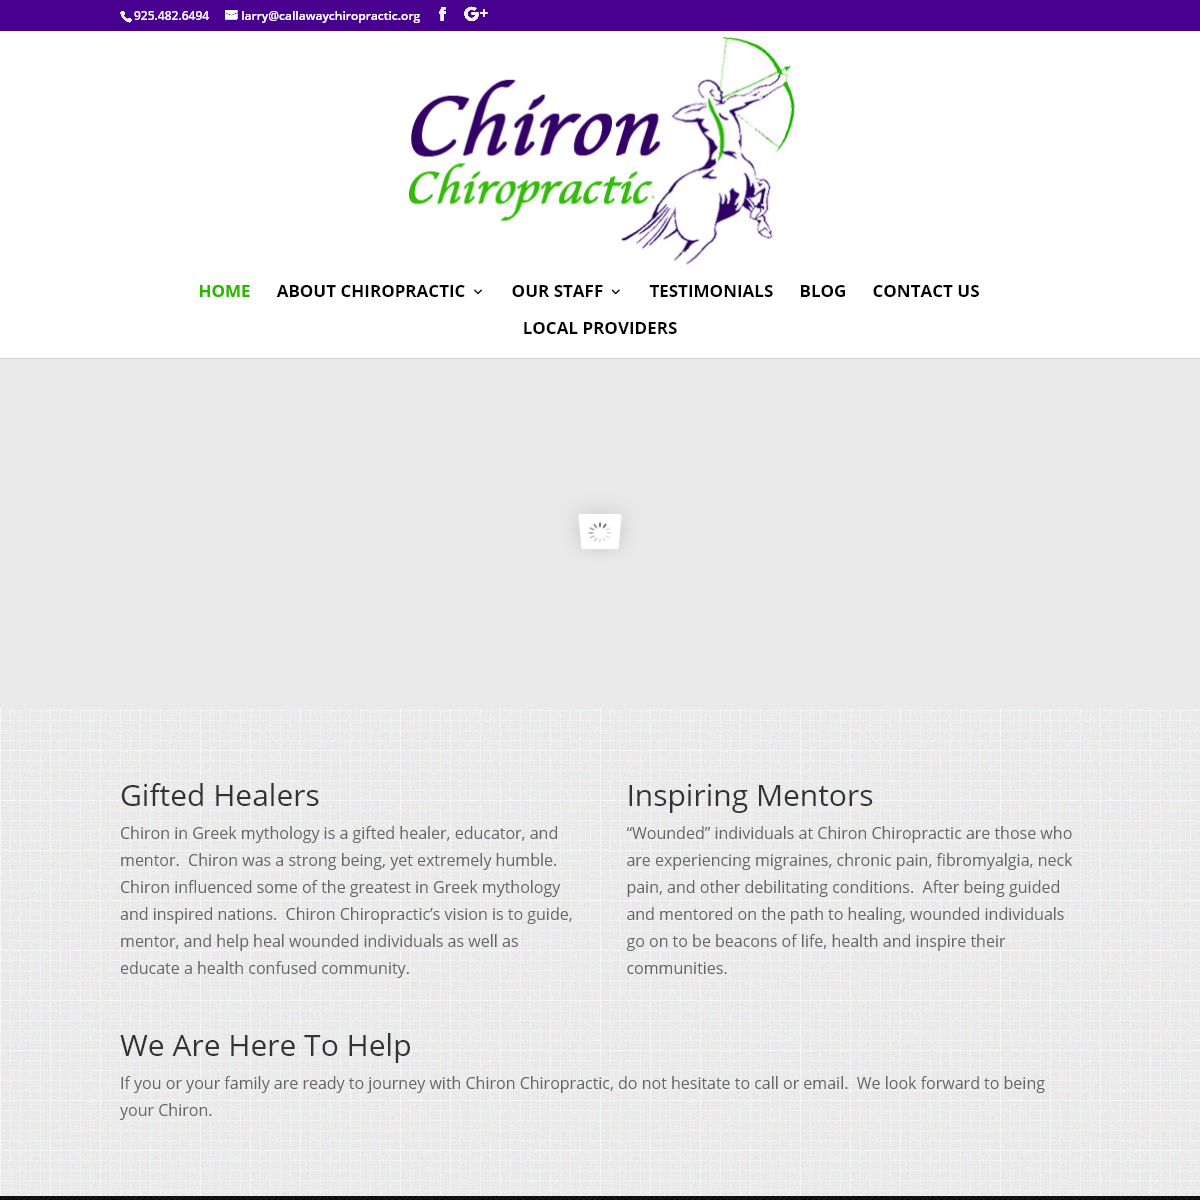 A complete backup of chironchiropractic.org